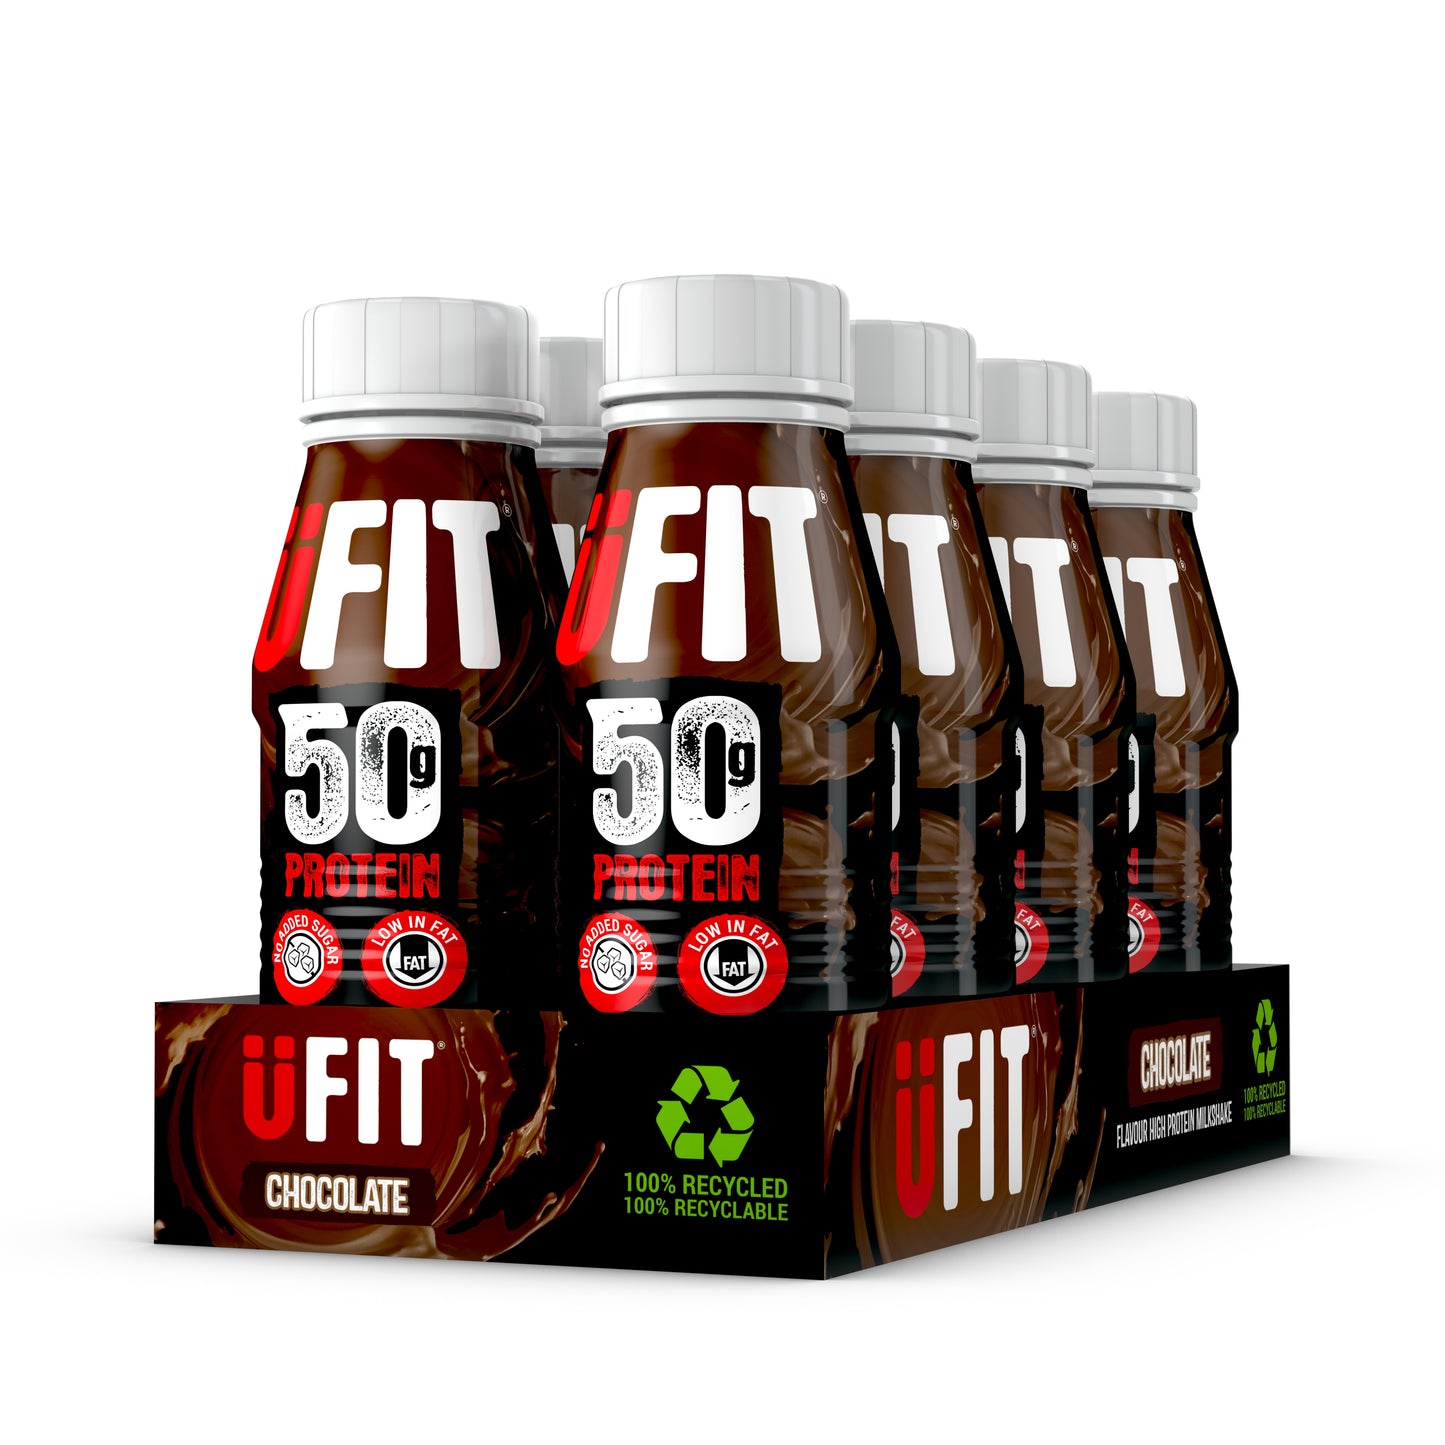 UFIT 50G PROTEIN - 3 CASES OF 8 FOR £45 (PACKS MAY VARY)